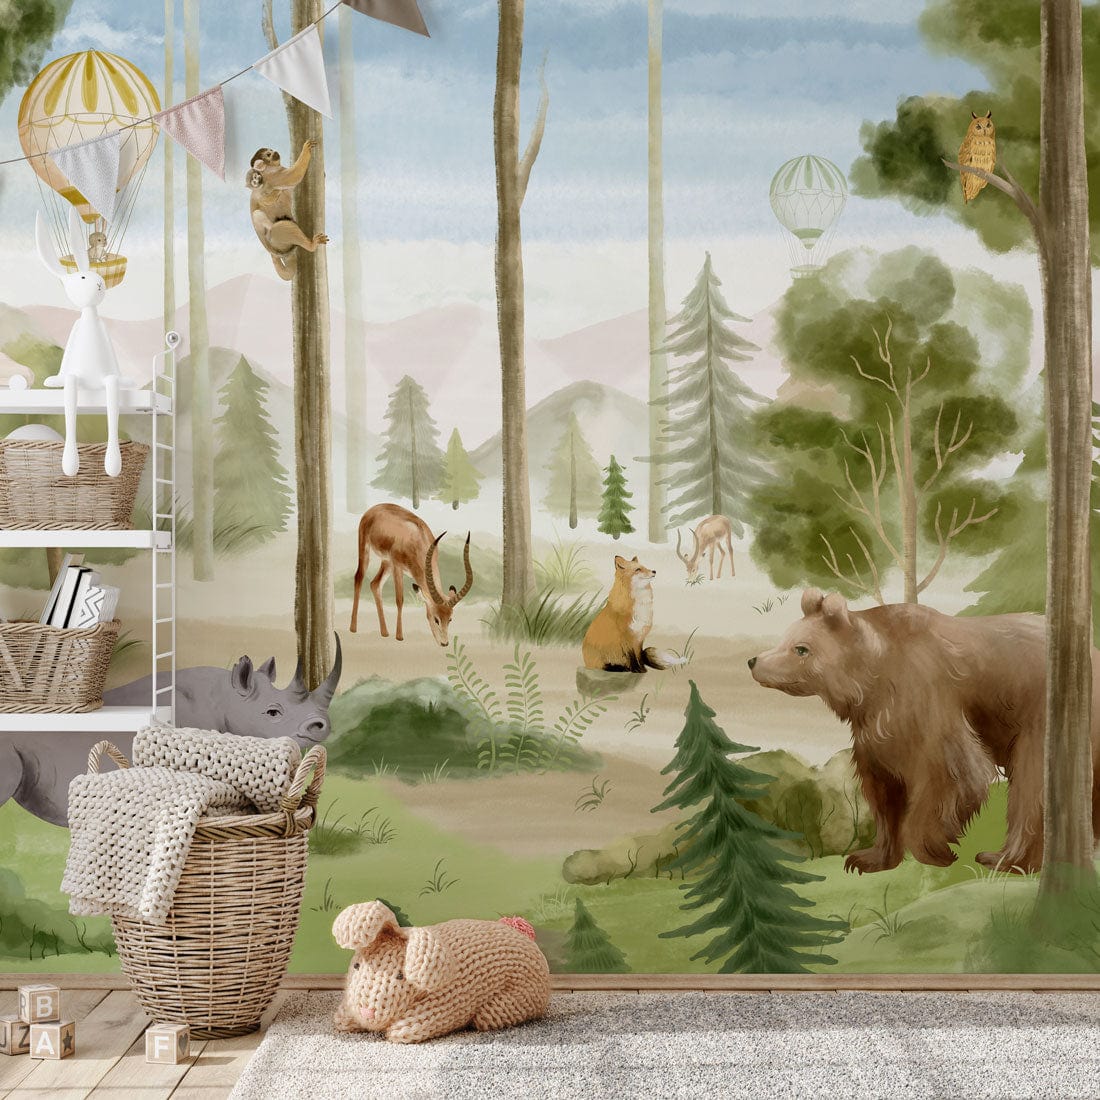 Animals in a Forest Mural Wall Decal for a Child's Room